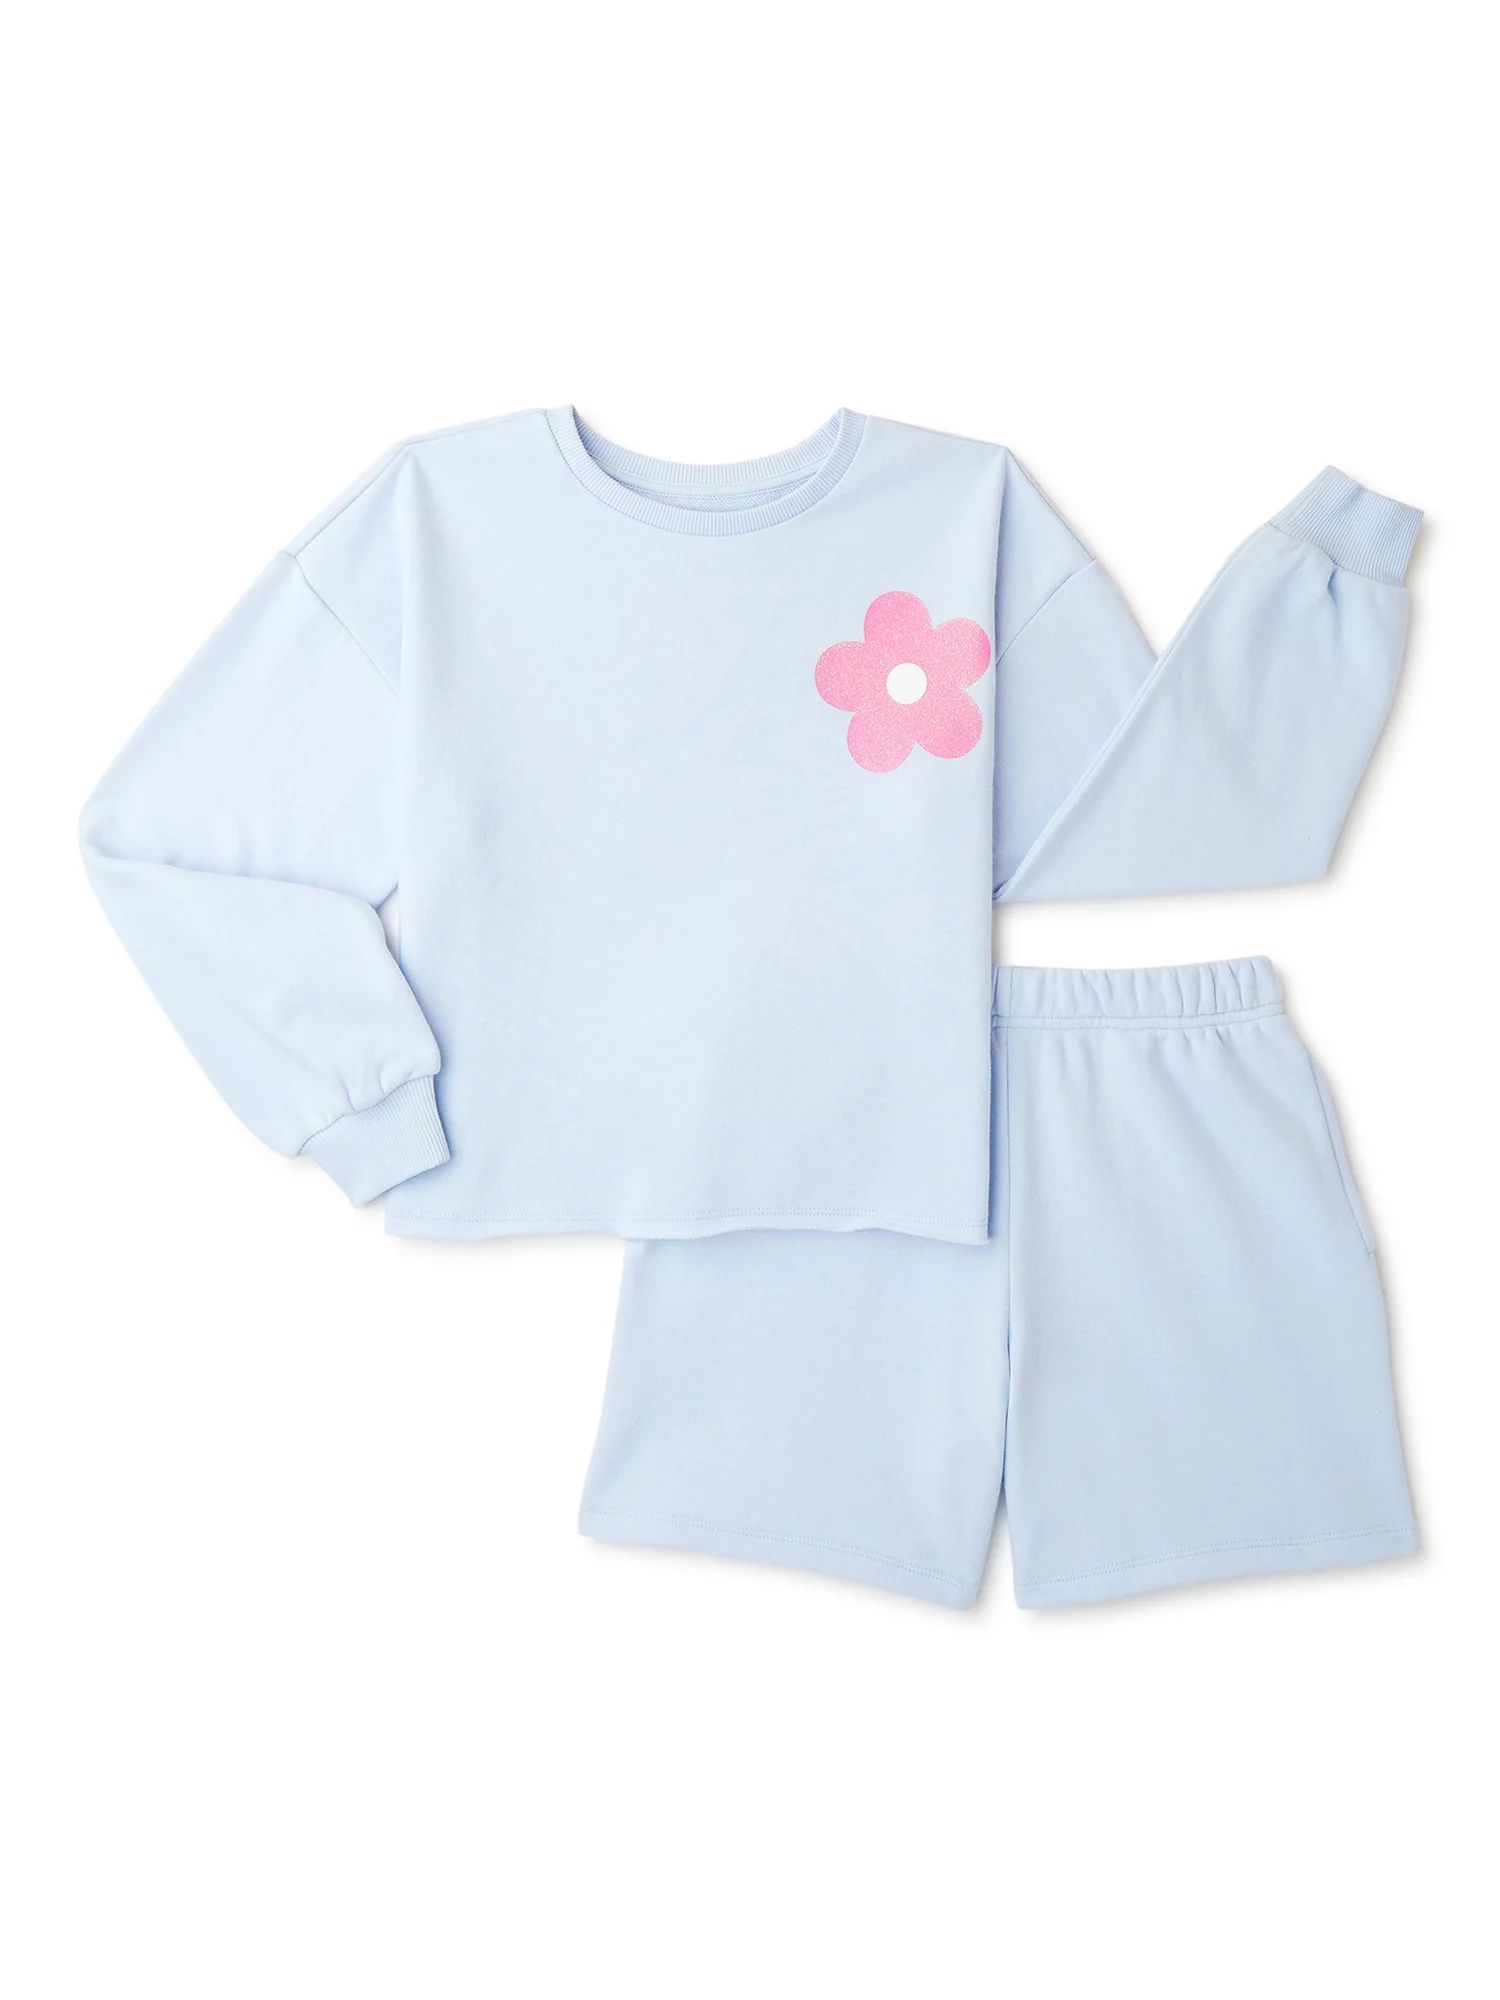 We Wear Cute Girls’ Sweatshirt and Comfy Shorts Outfit Set, 2-Piece, Sizes 4-16 | Walmart (US)